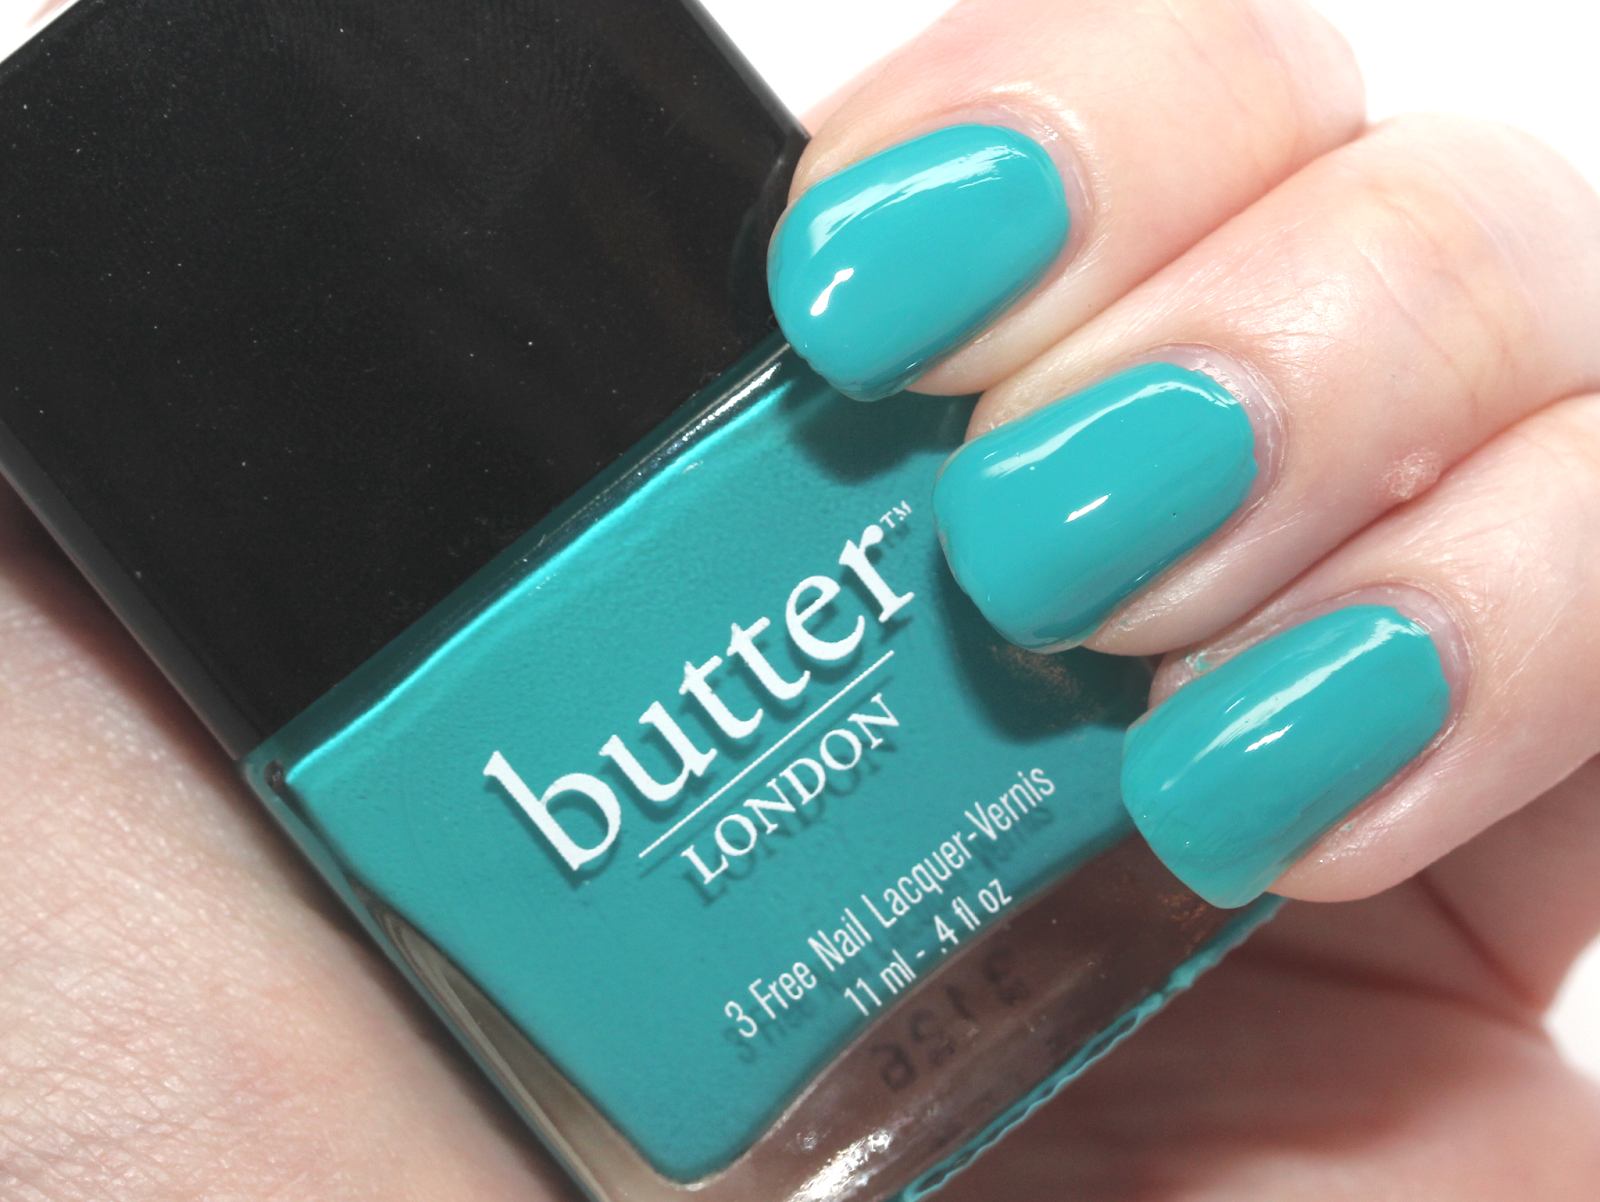 Butter London Nail Lacquer in "Royal Navy" - wide 8